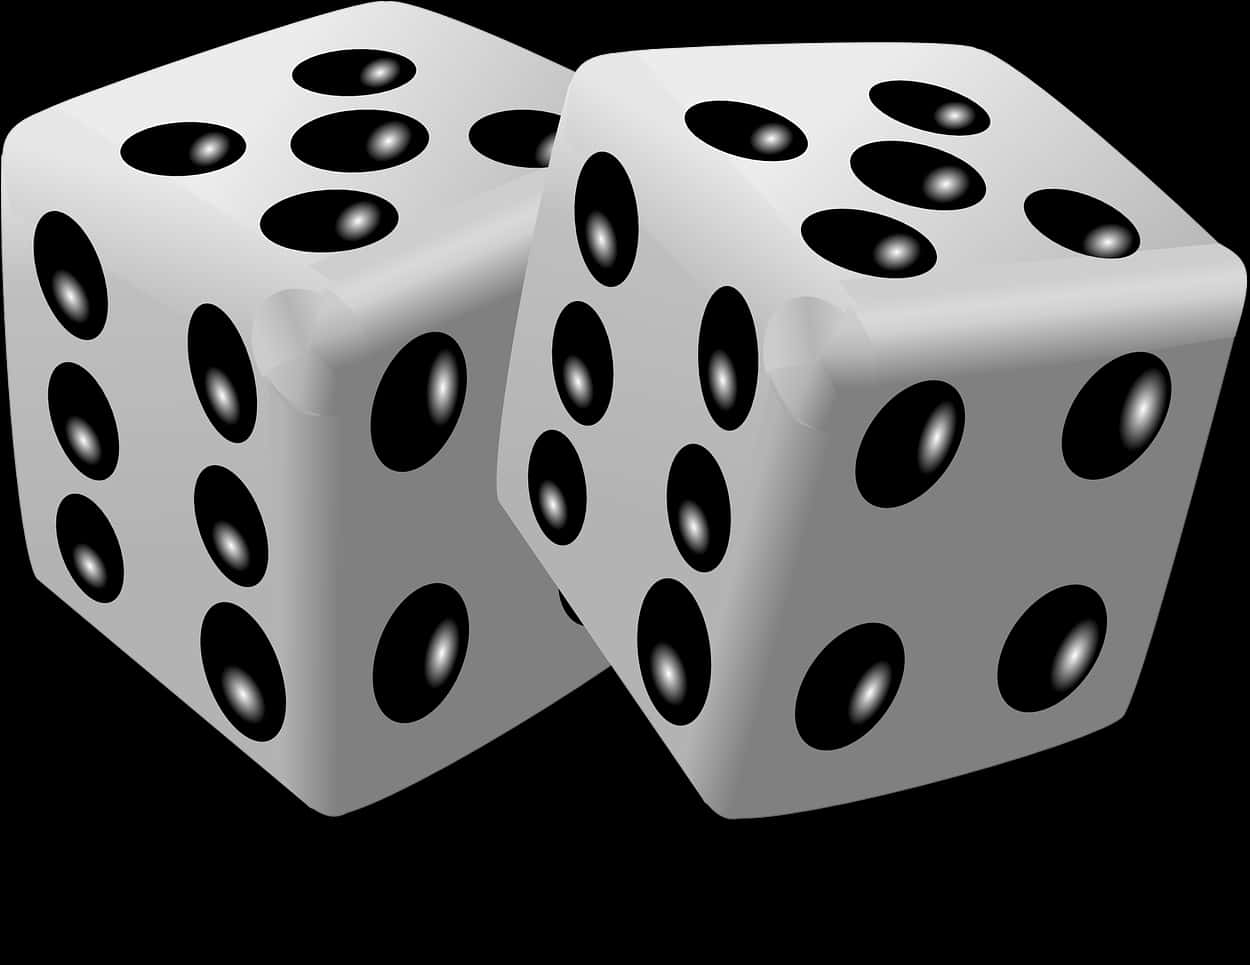 A Pair Of Dice With Black Dots